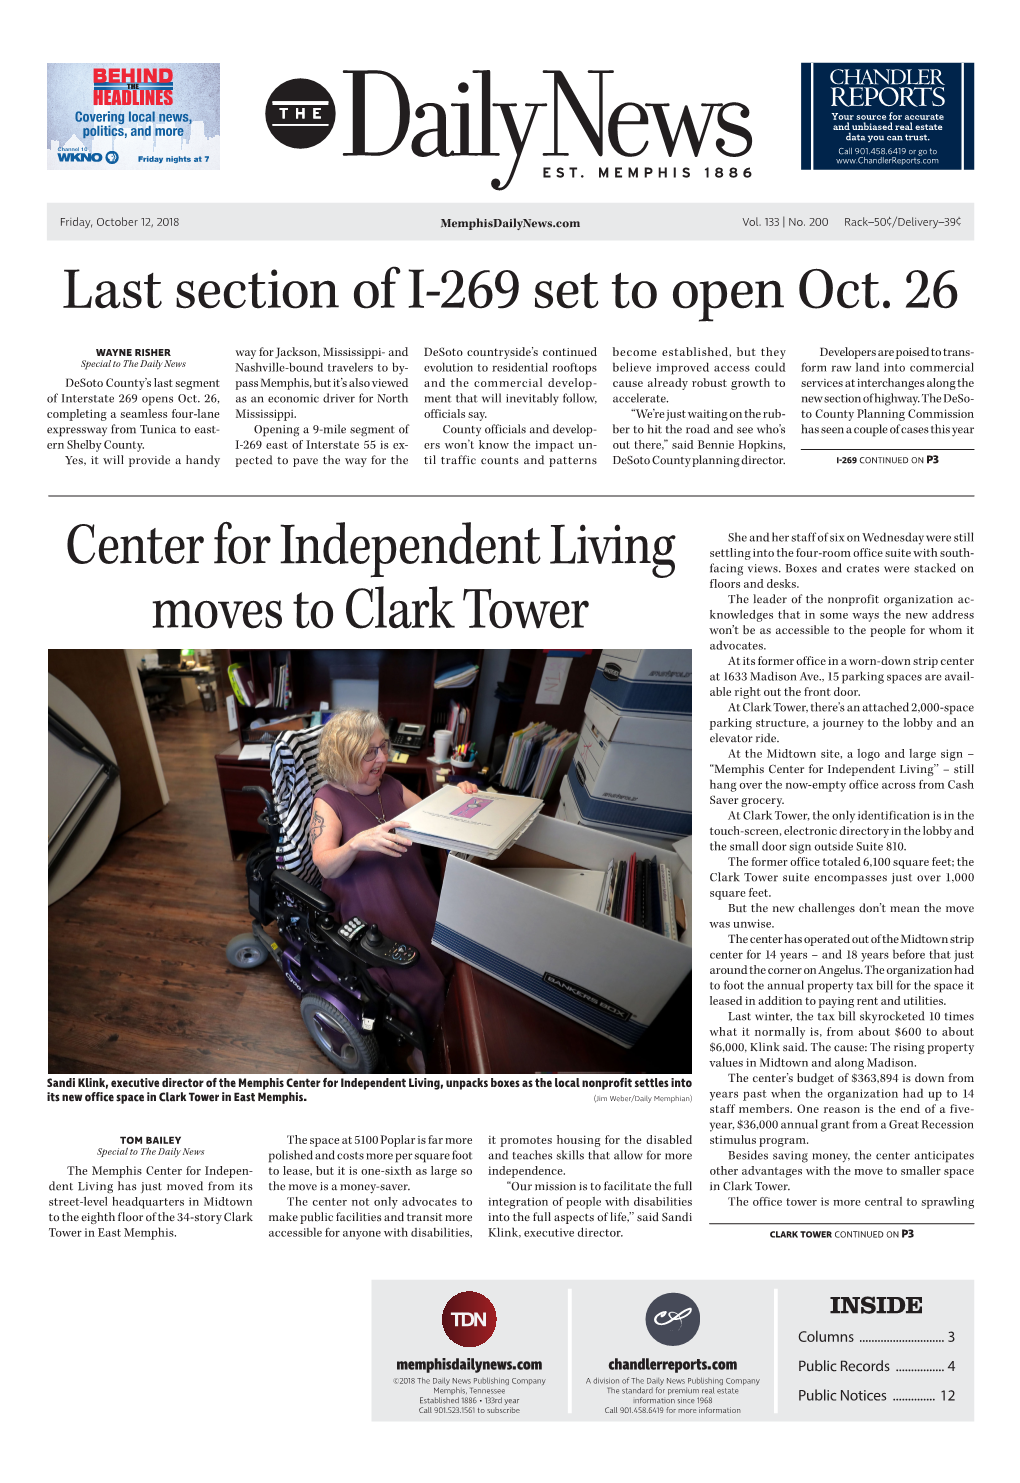 Center for Independent Living Moves to Clark Tower